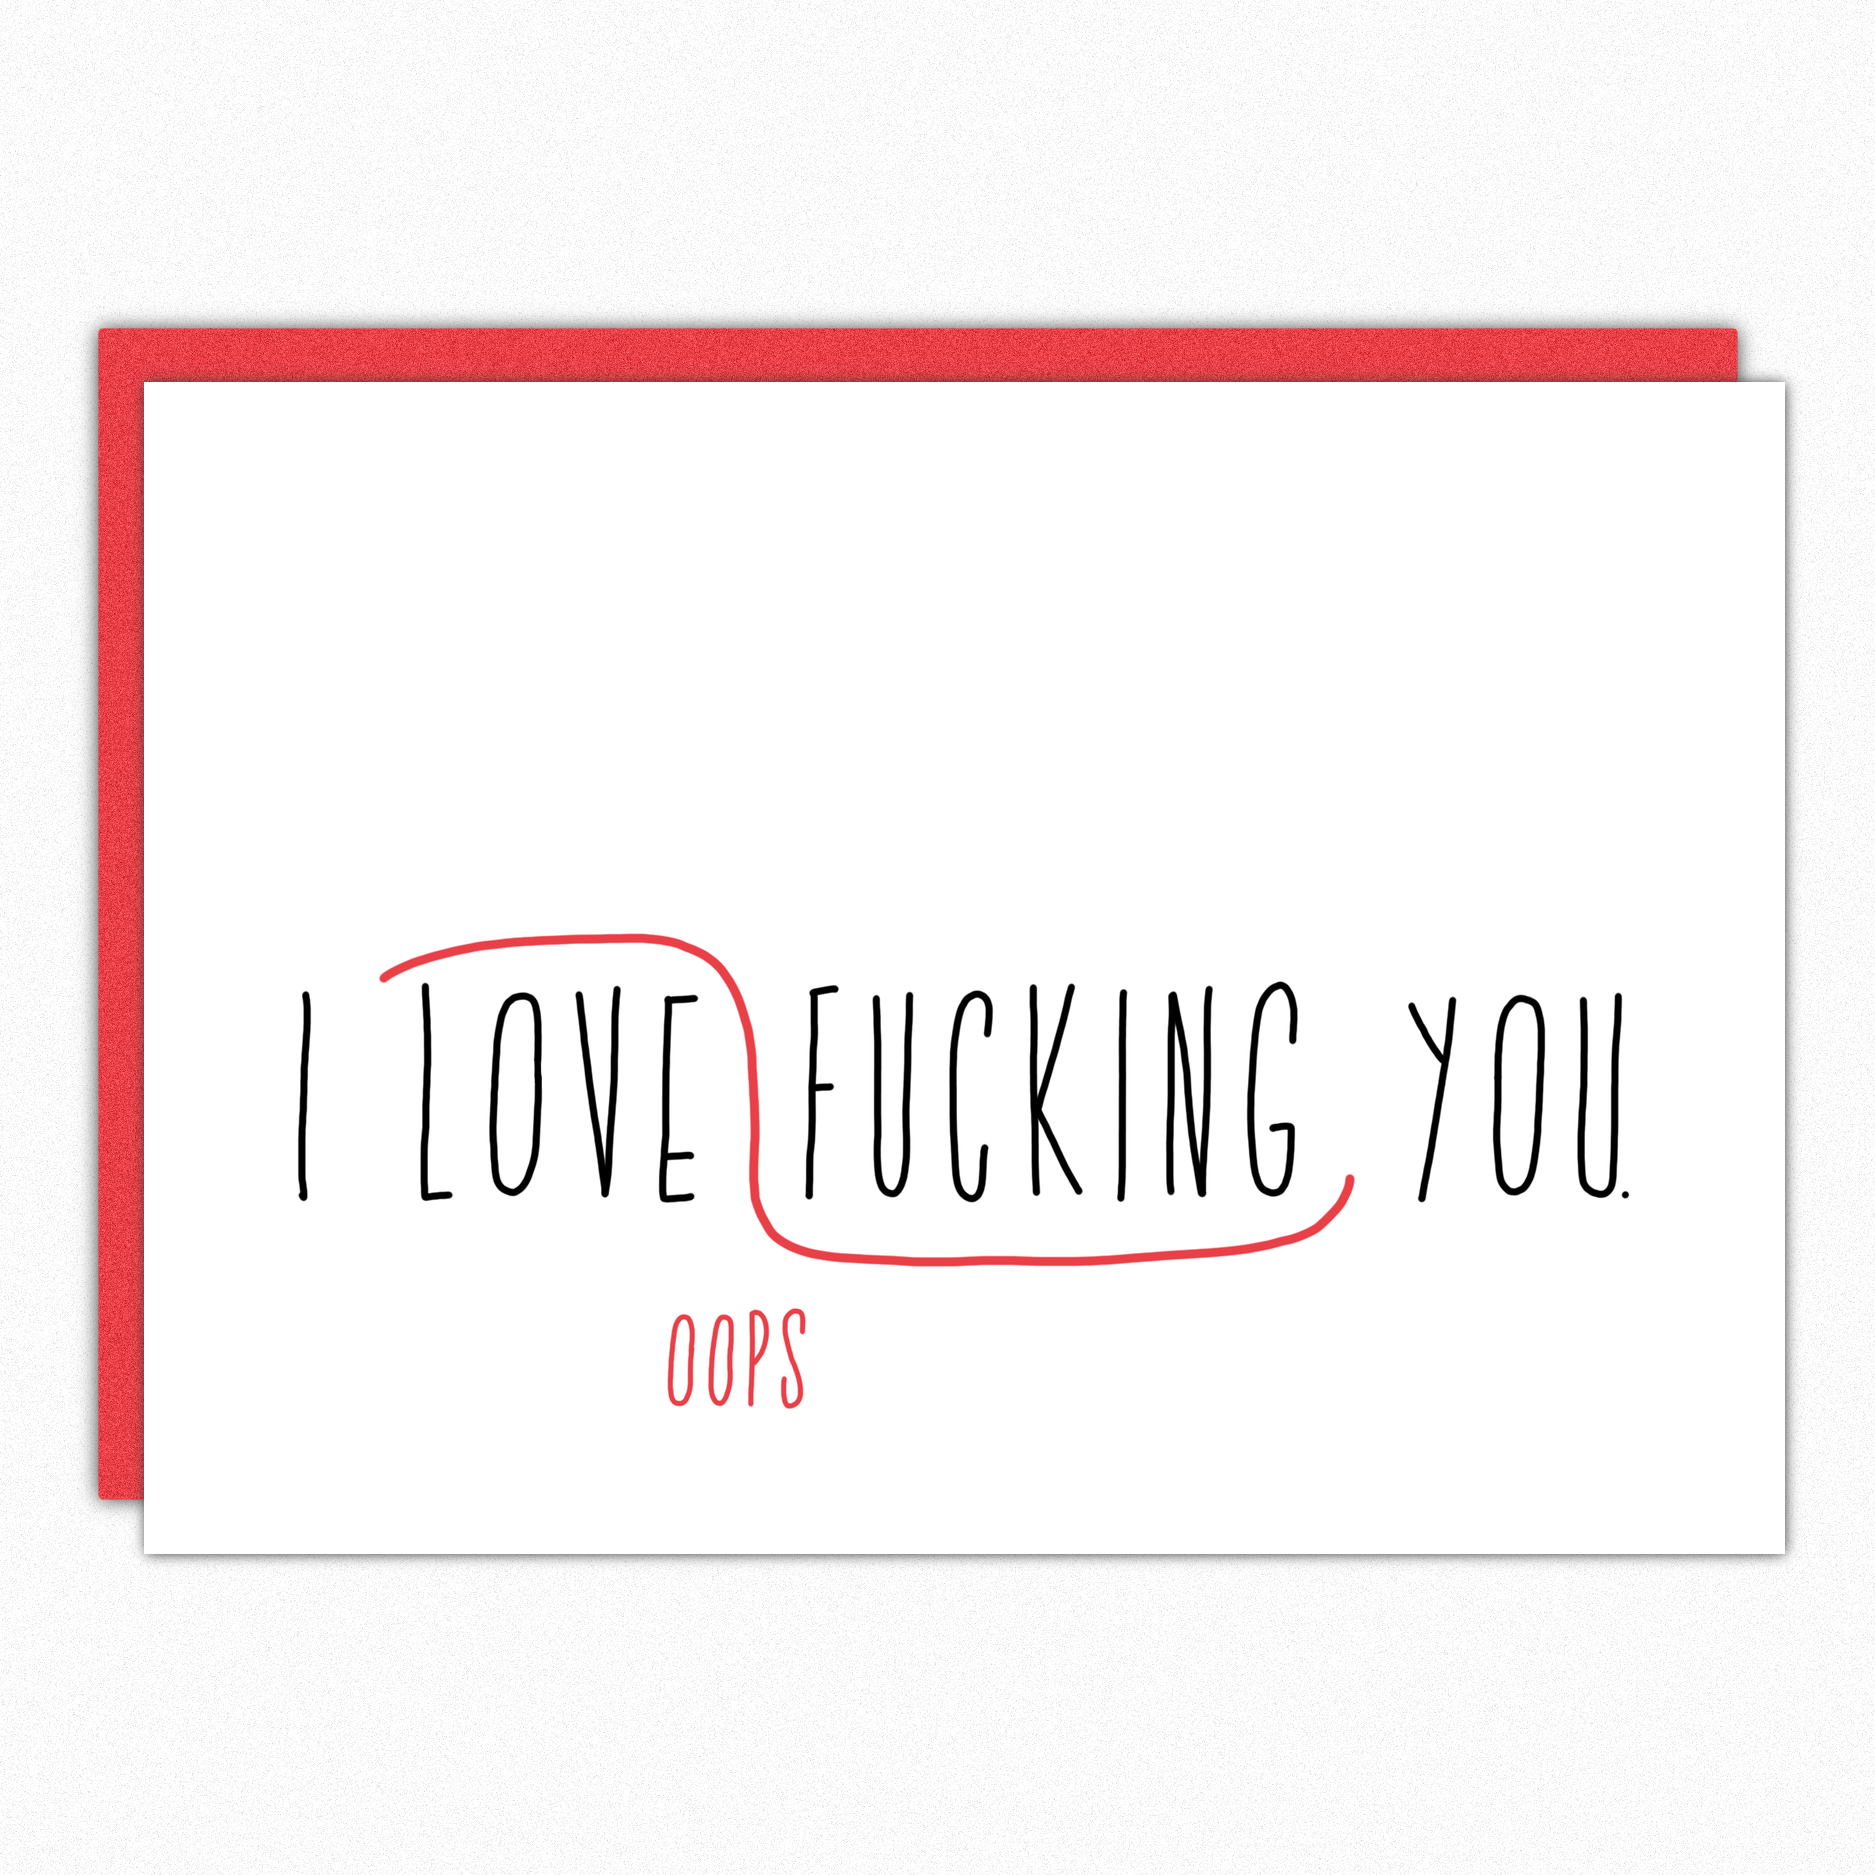 Proofreader's Mark IN004 Naughty Valentine's Day Card